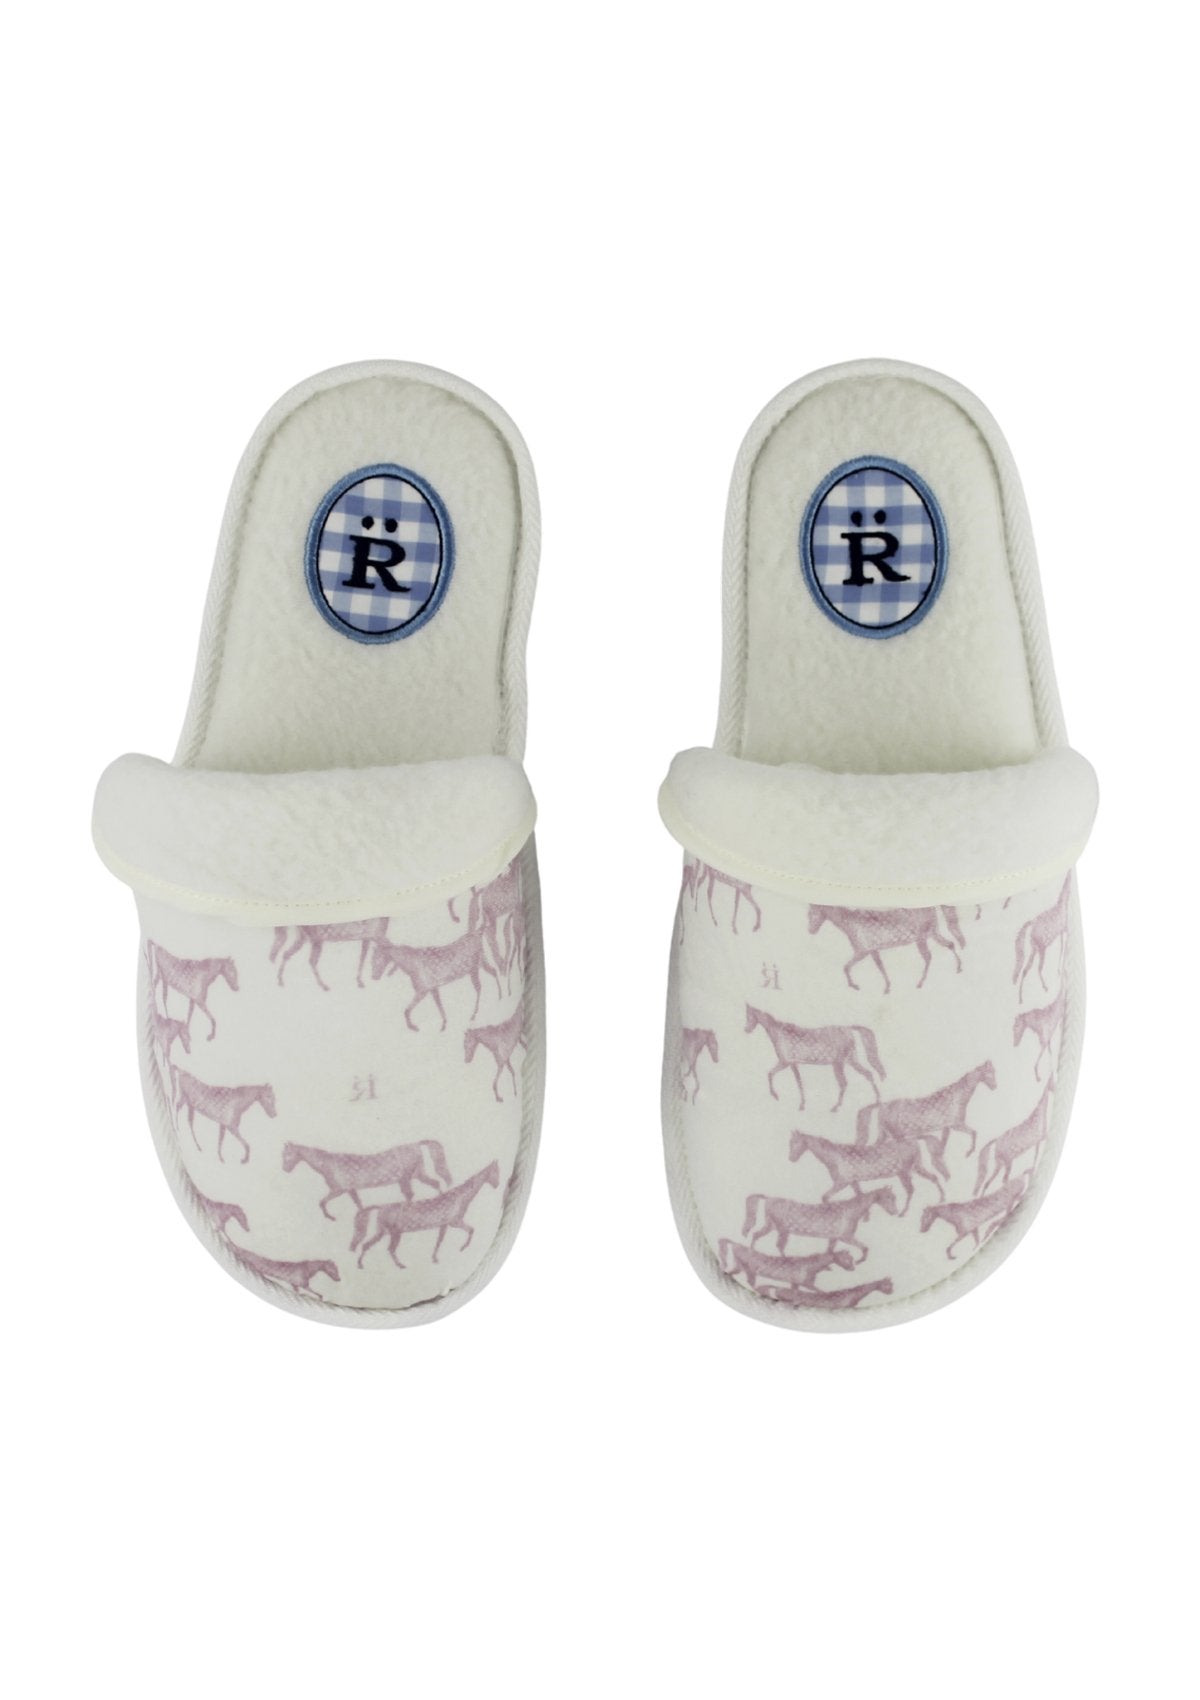 Ronner Allegria Slippers | Mini Horse Navy or Pink